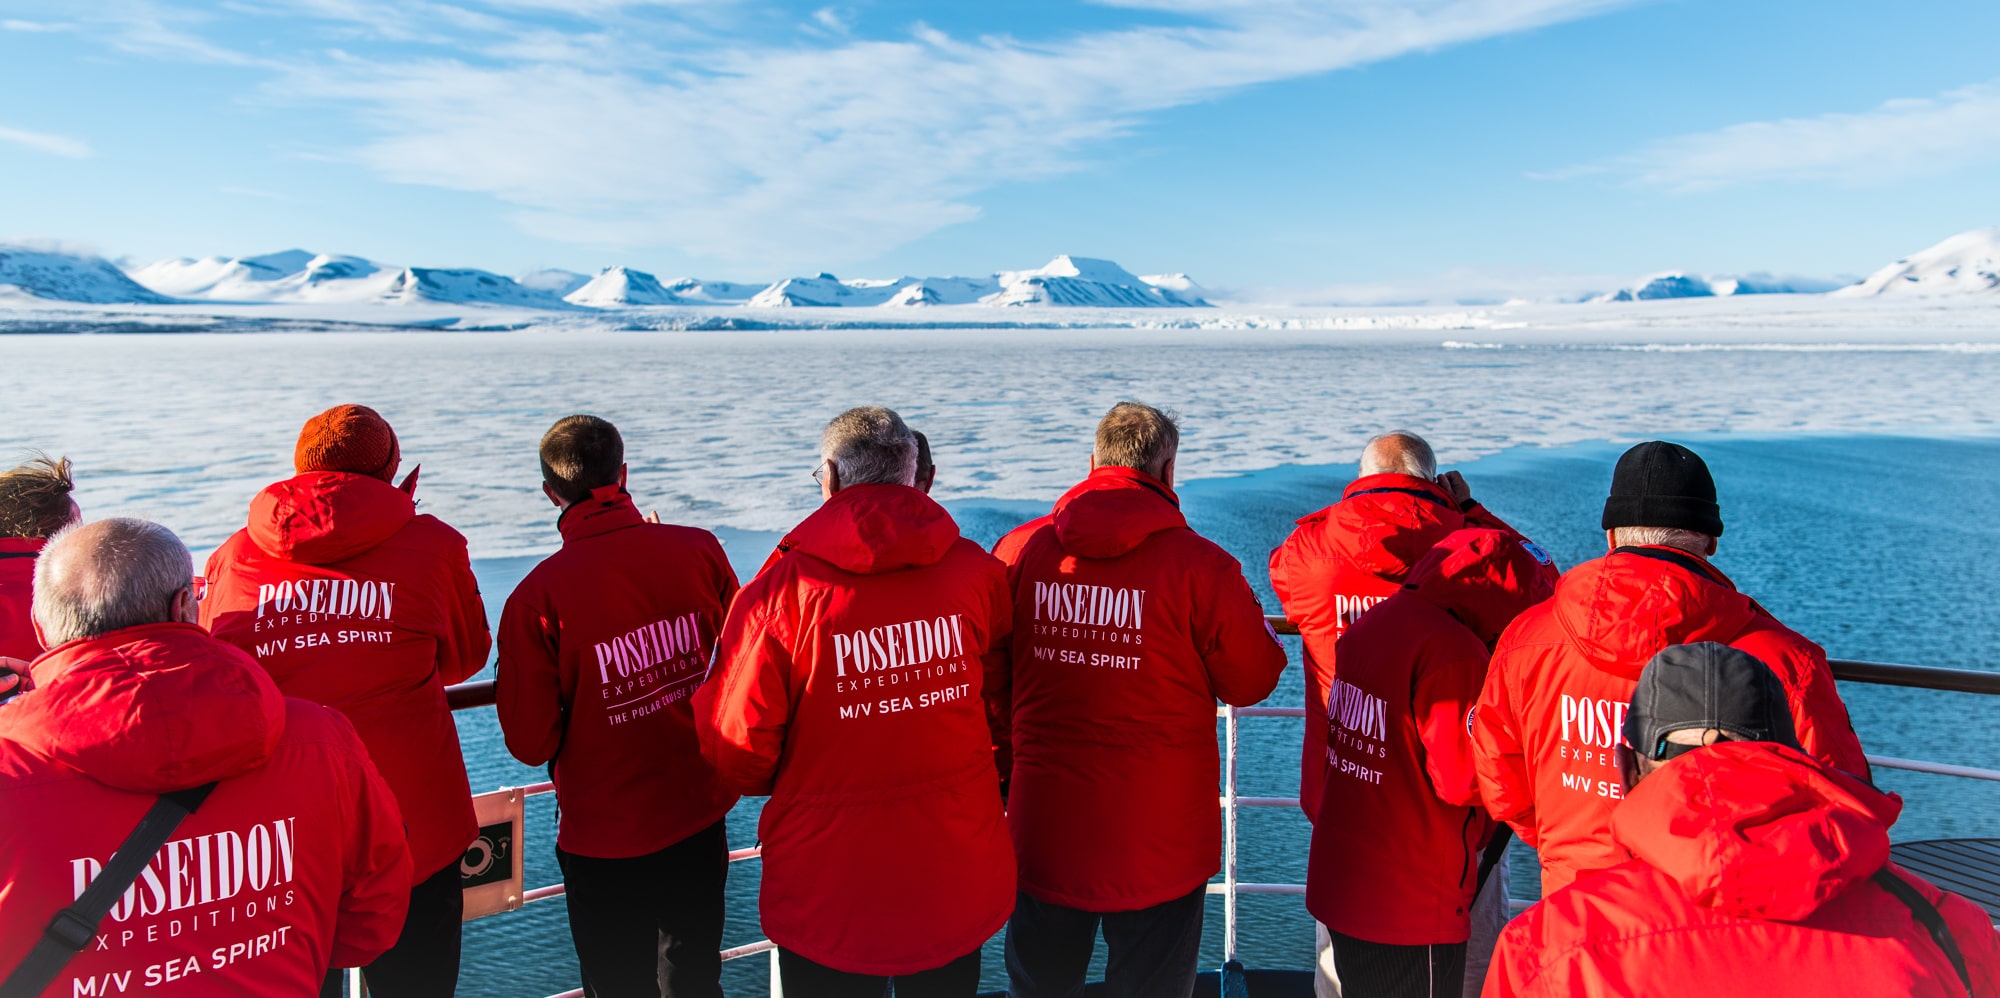 Creating expedition cruise memories with photographs